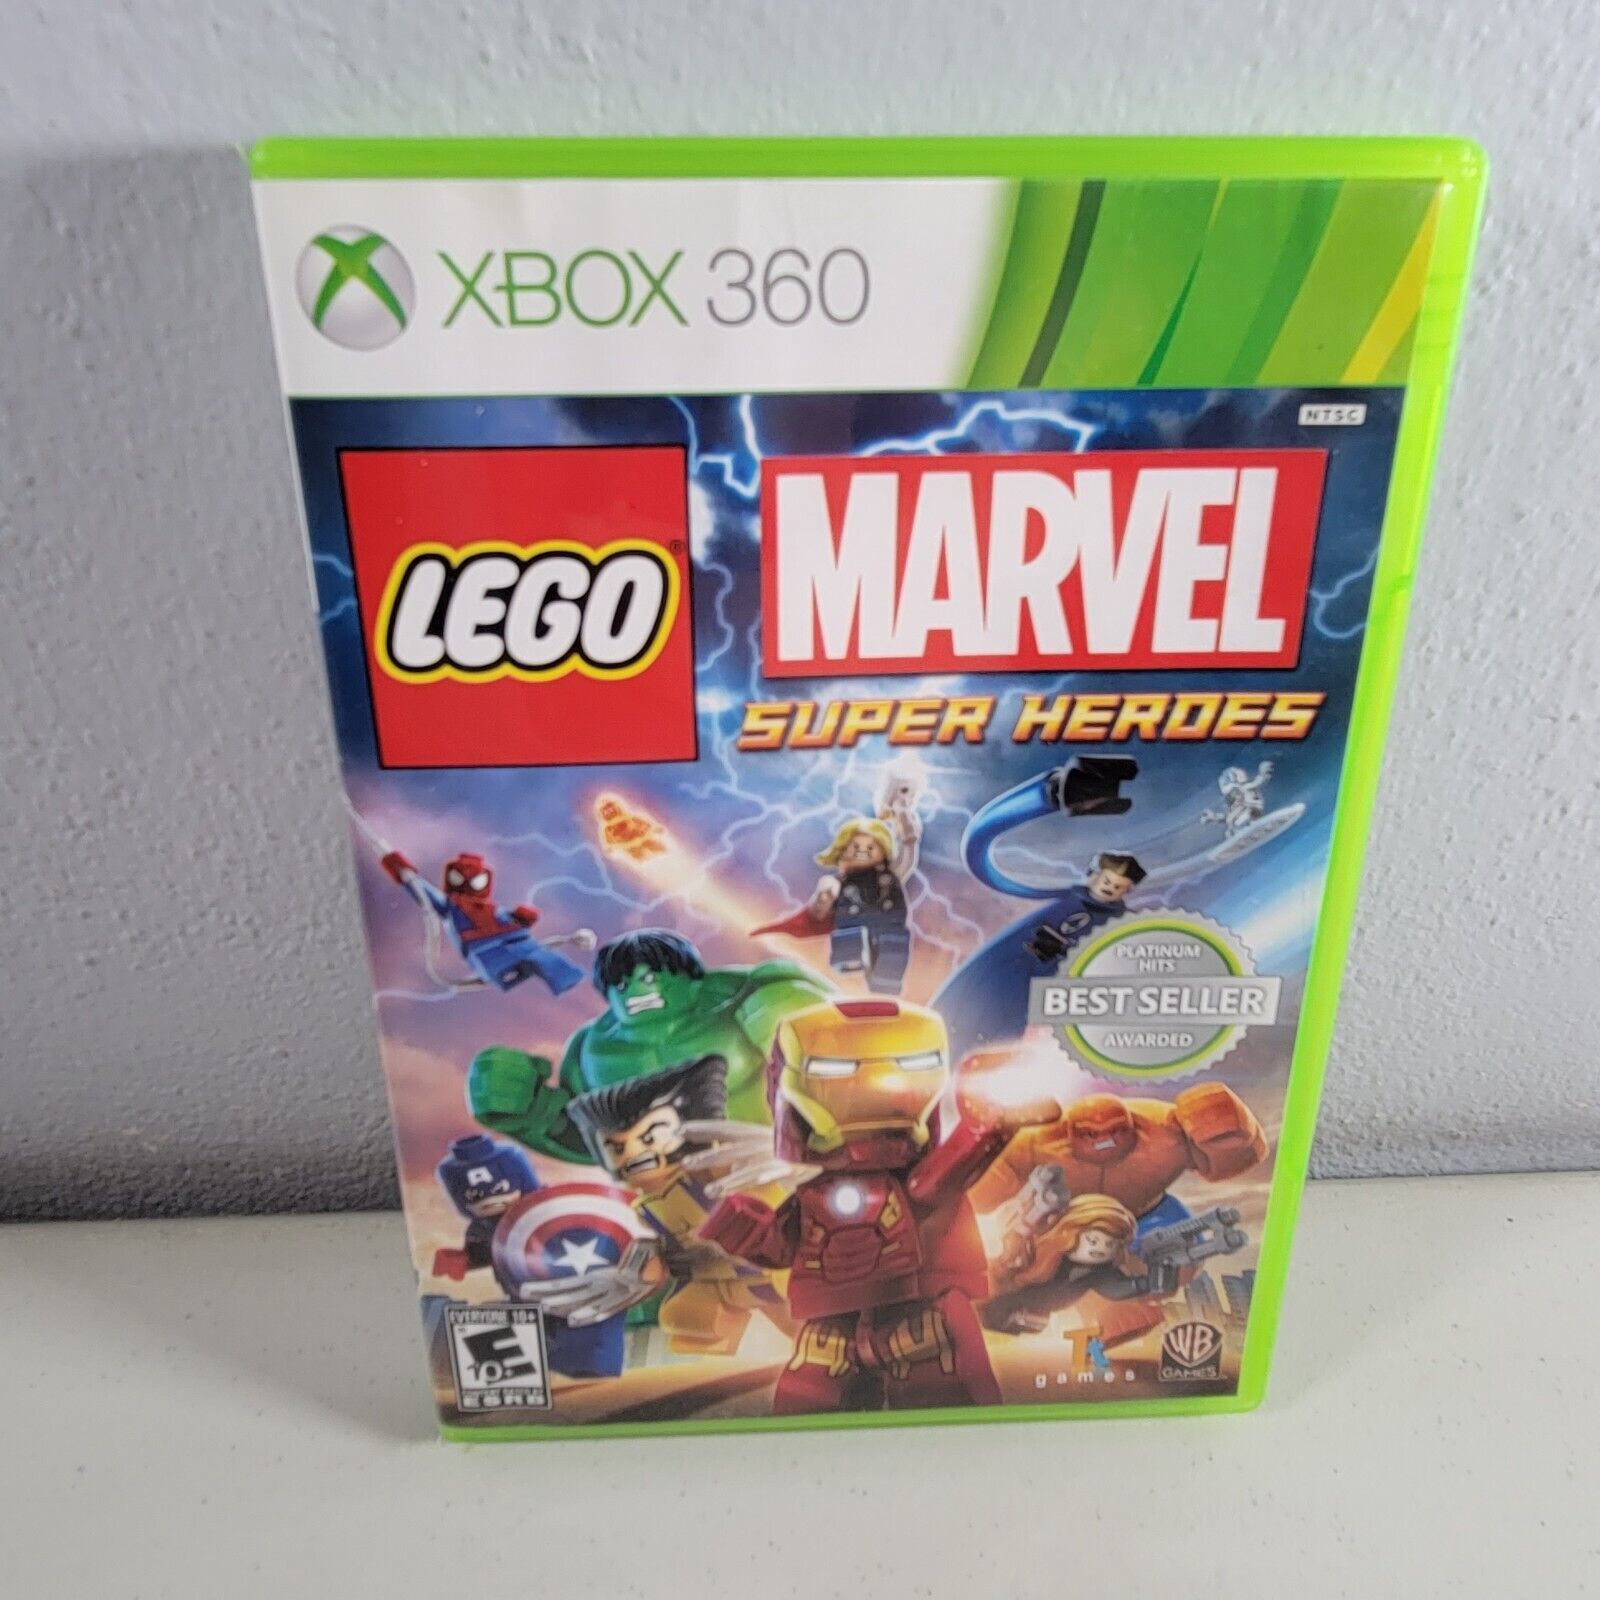 LEGO Marvel Super Heroes Xbox 360 Video Game 2013 Complete With Manual/Tested - $4.95